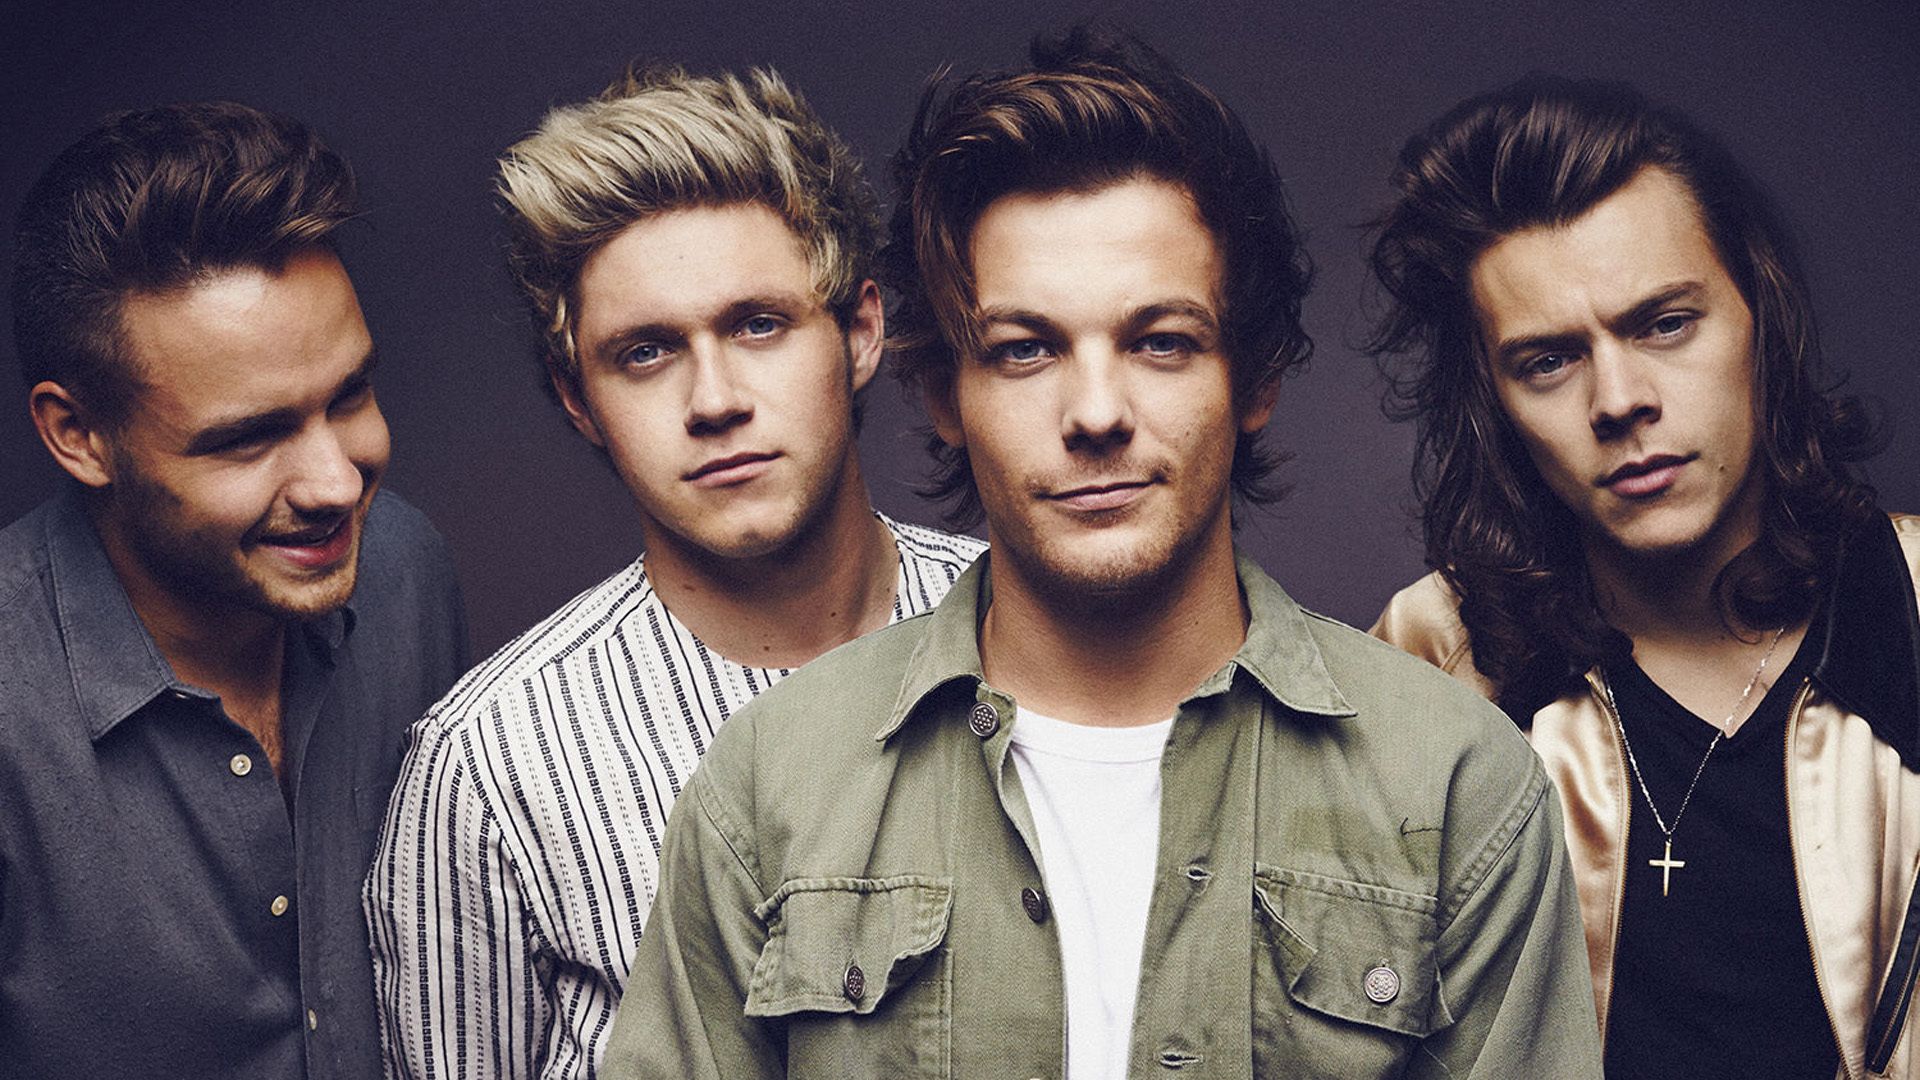 1920x1080 One Direction One Direction Wallpaper Laptop 1920x1080 Download Hd Wallpaper